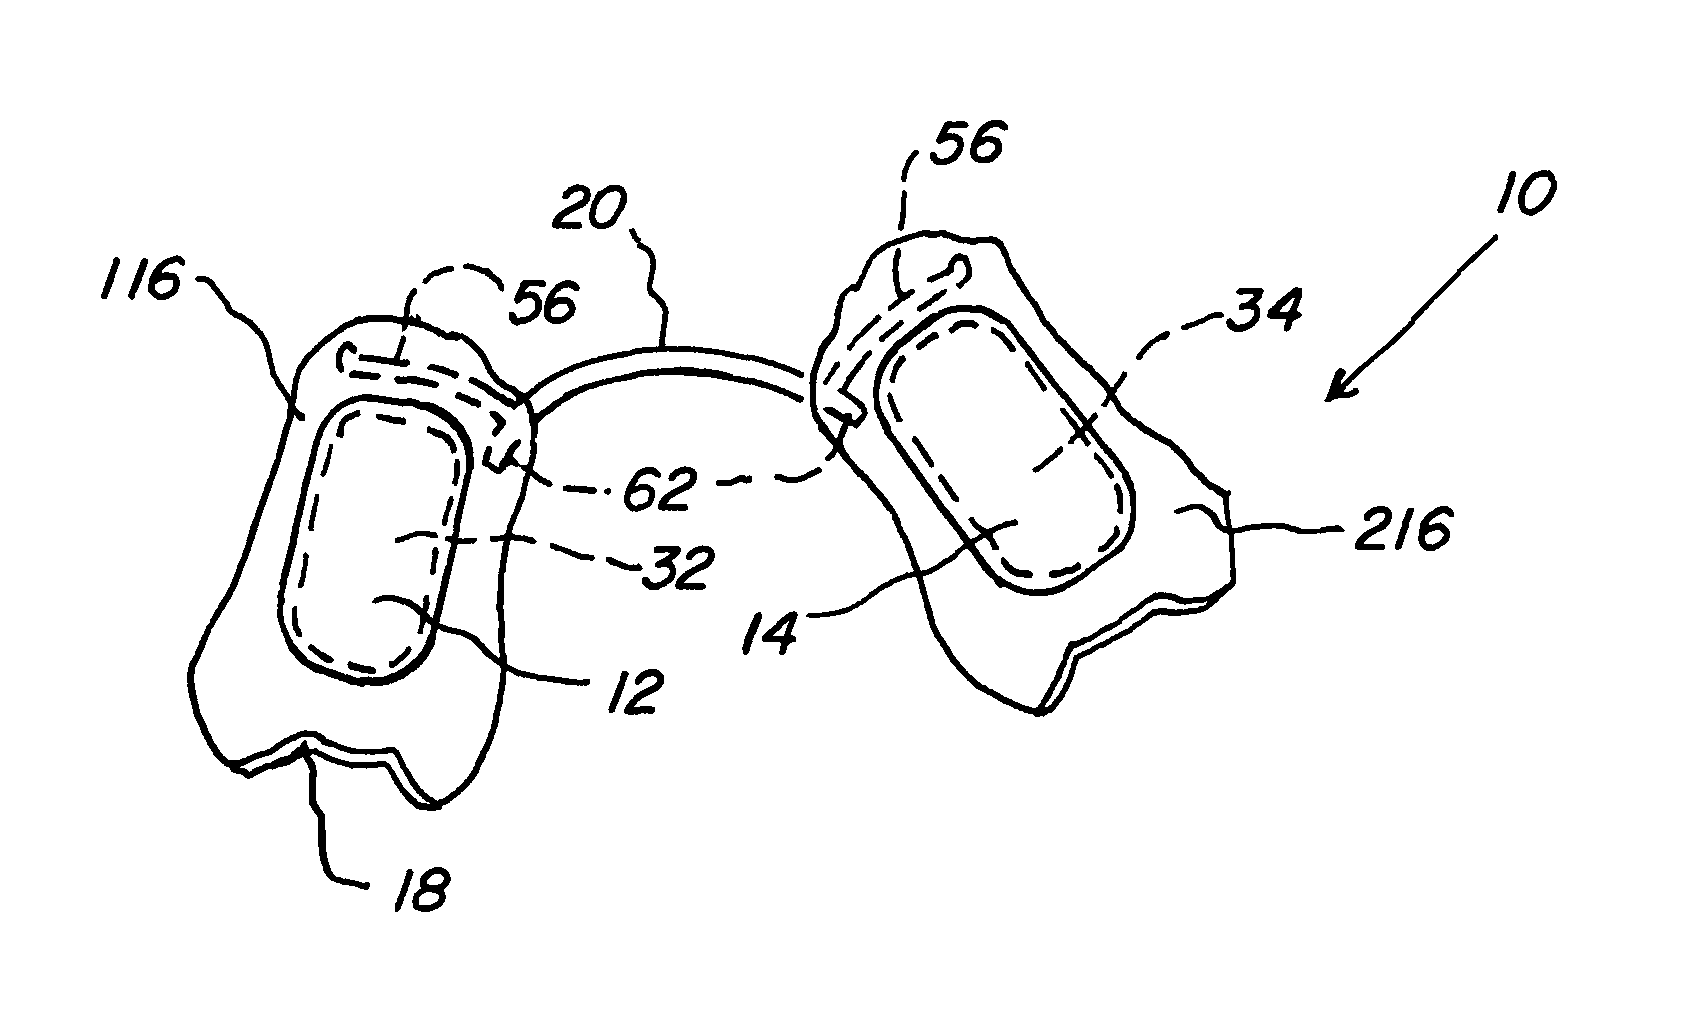 Oral appliances with major connectors and methods for manufacture